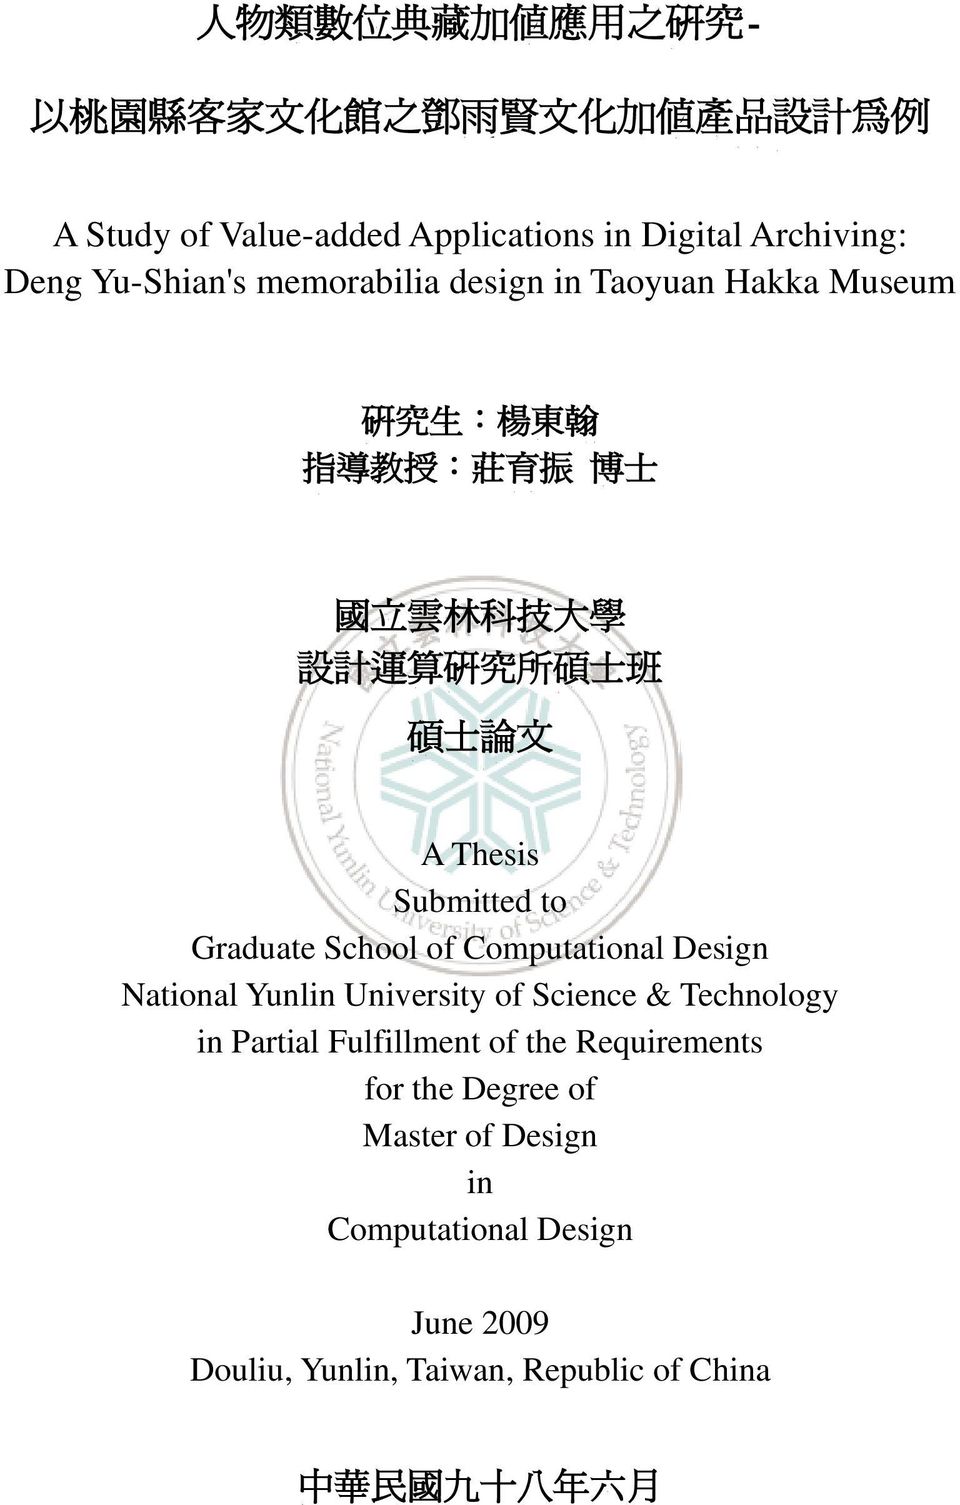 Thesis Submitted to Graduate School of Computational Design National Yunlin University of Science & Technology in Partial Fulfillment of